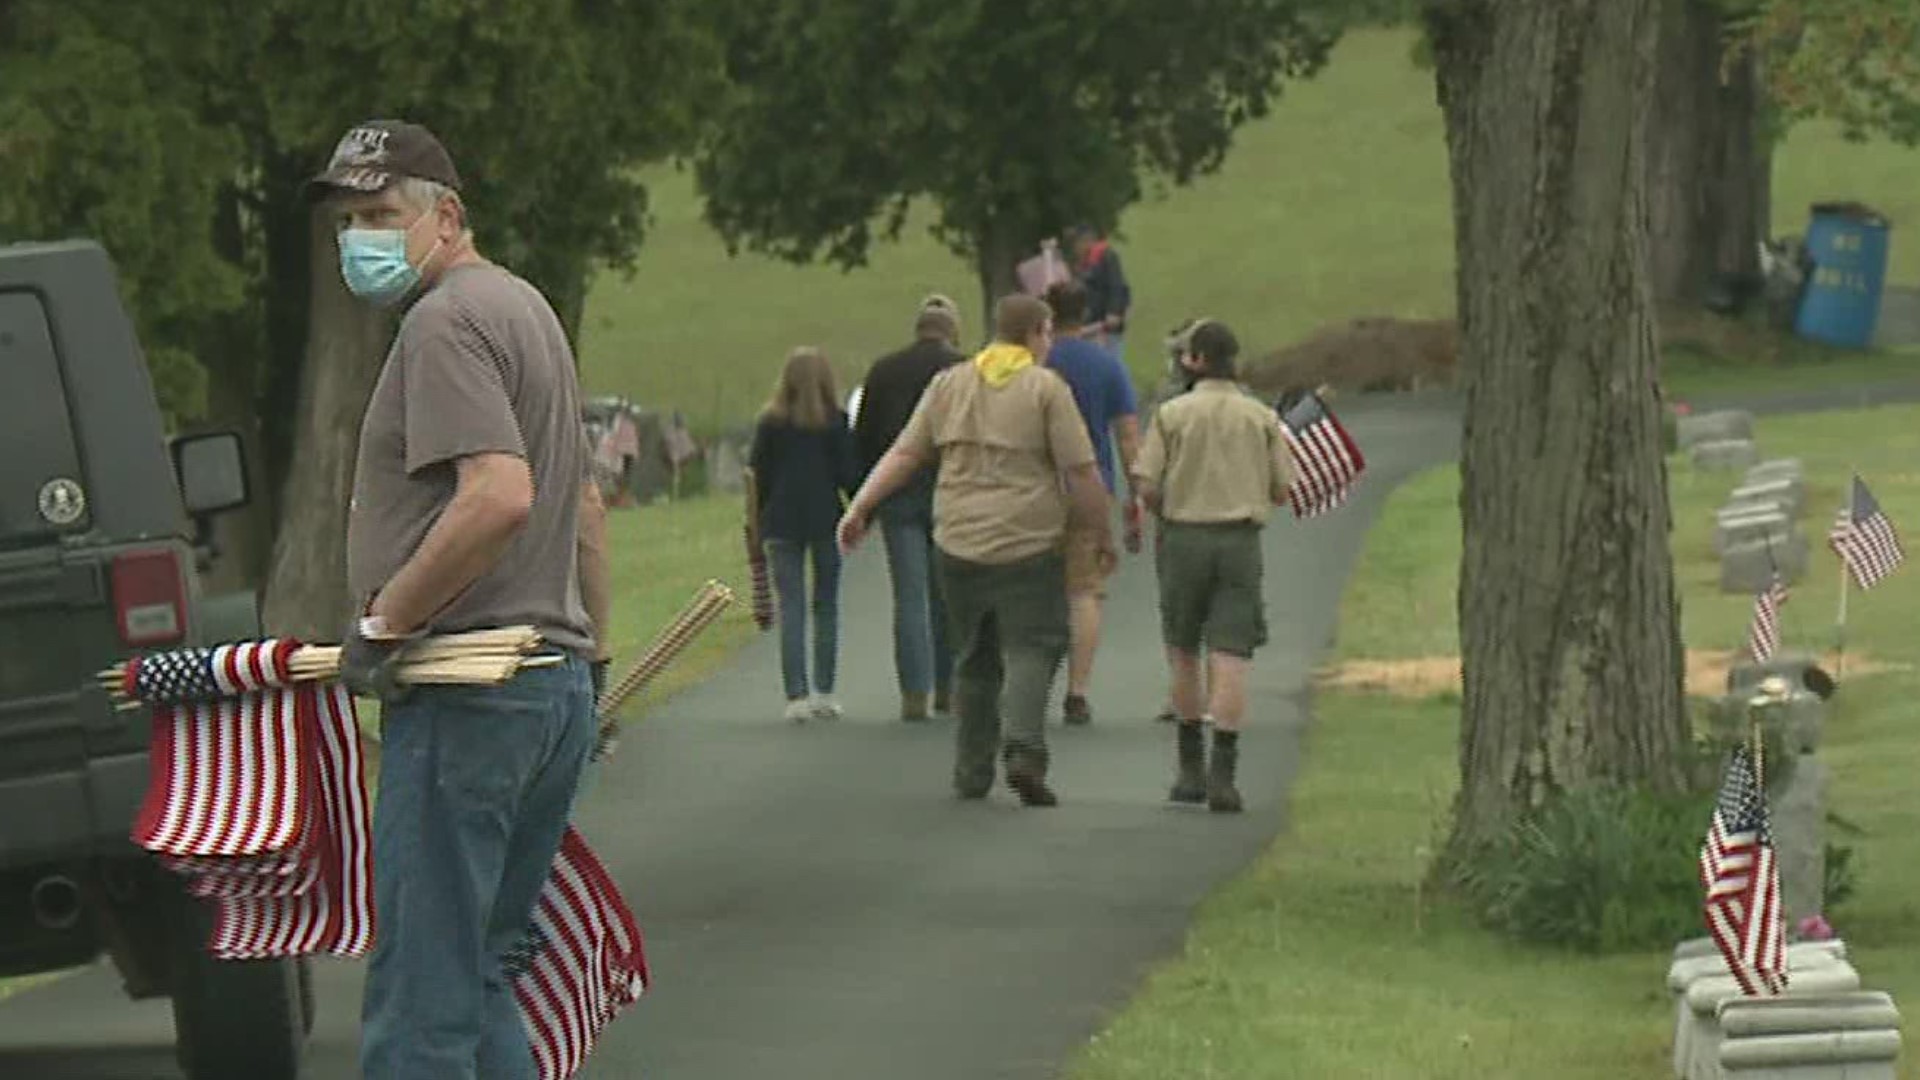 Folks met up at Sunnyside Cemetery around eight this morning to check for tattered flags in need of replacing.